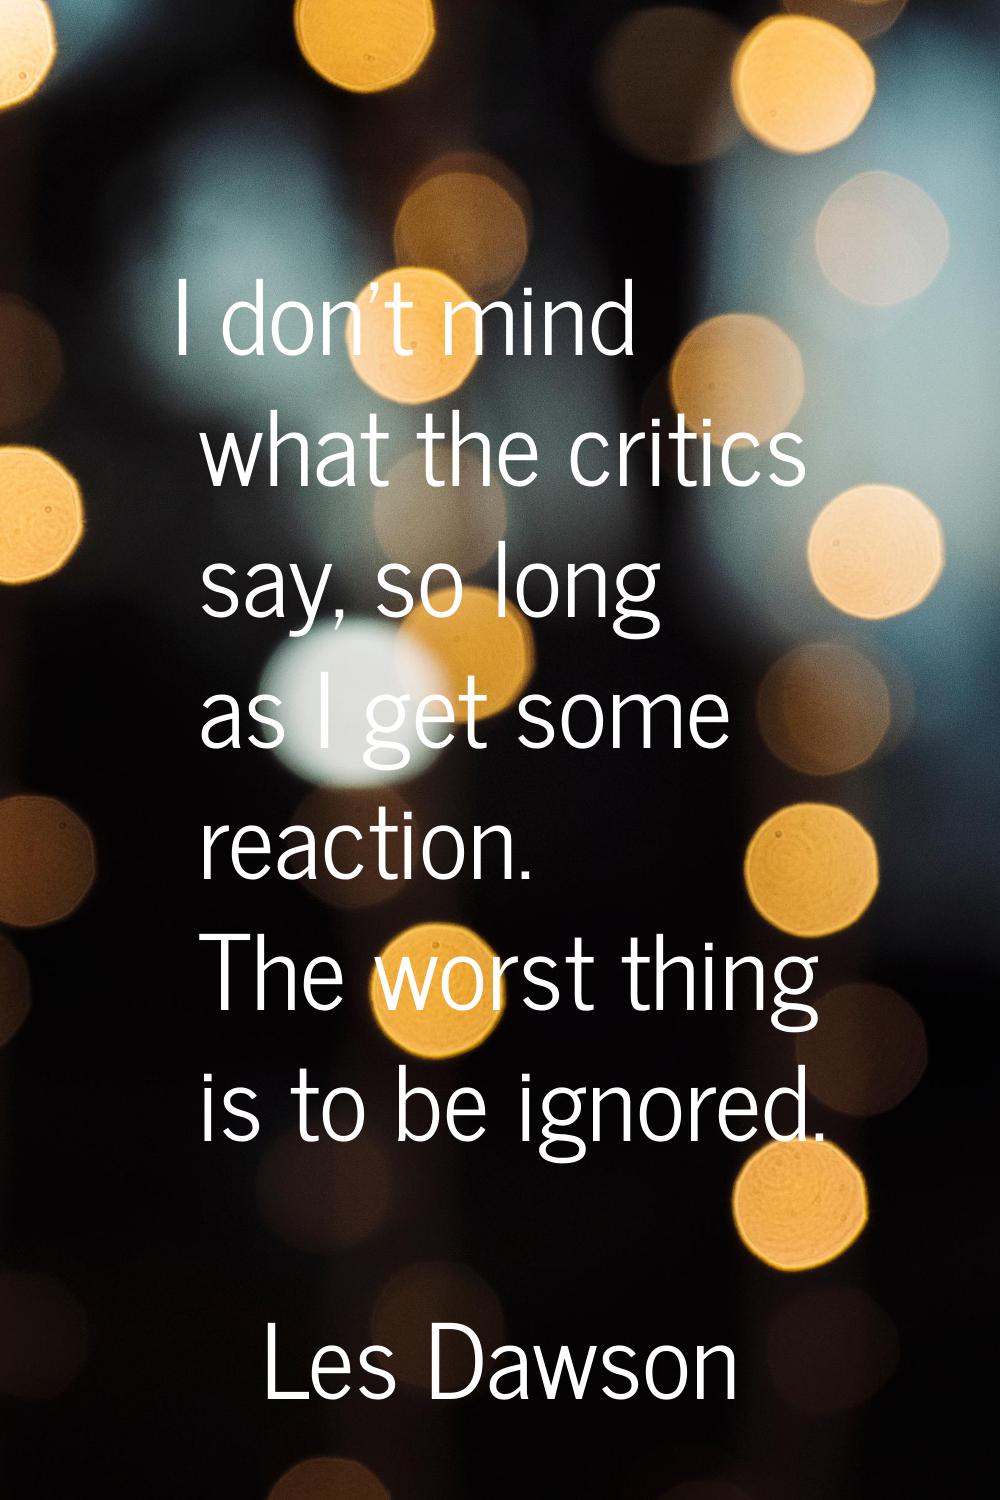 I don't mind what the critics say, so long as I get some reaction. The worst thing is to be ignored